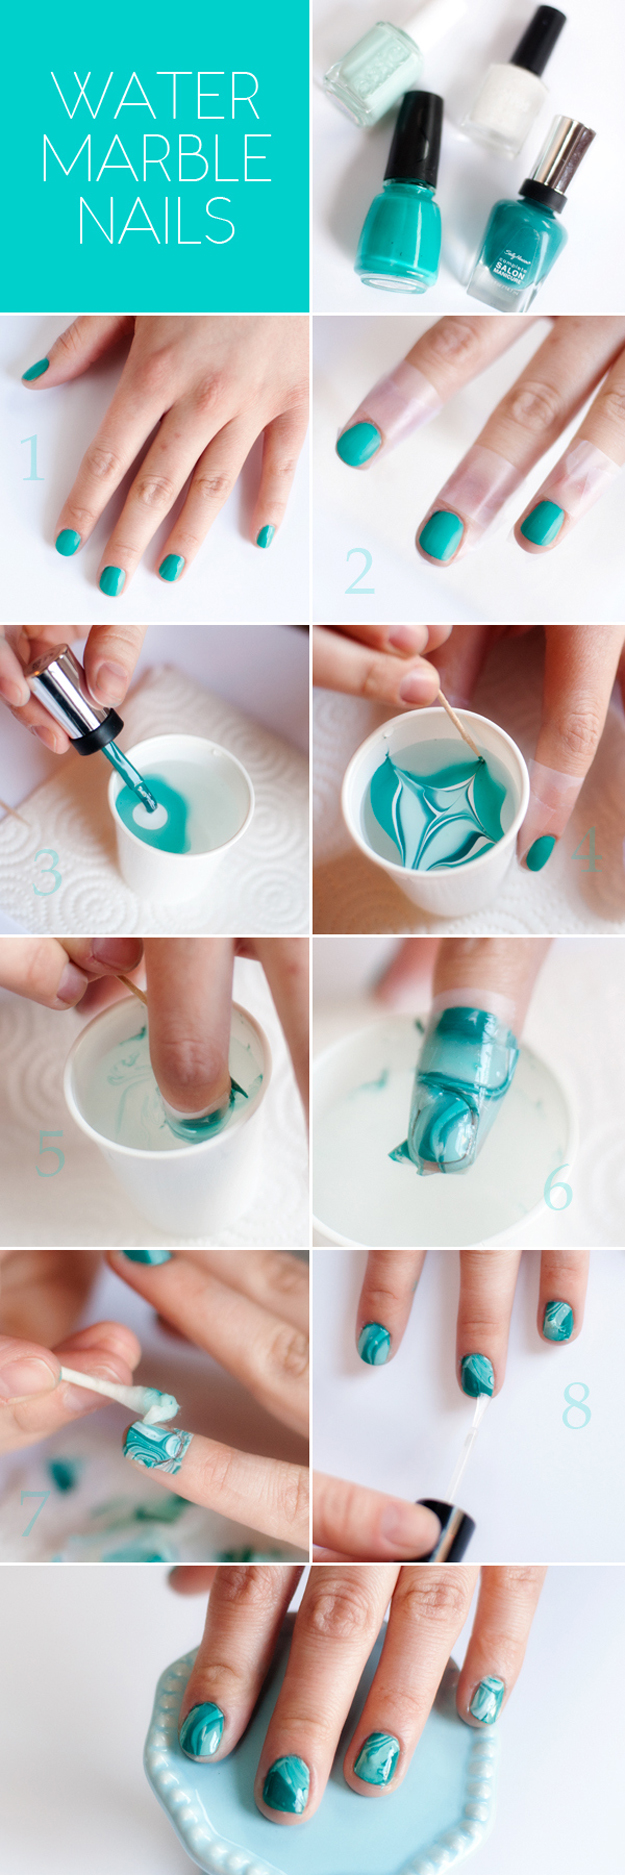 Cool Nail Art Ideas - How to Do Water Marble Nails - Nail Tutorials for Teens and Adults - Fun for Teens and Tweens- Nail Polish Design Ideas and Art Tutorial - Easy DIY Nail Designs - Step By Step Tutorials and Instructions for Manicures at Home 